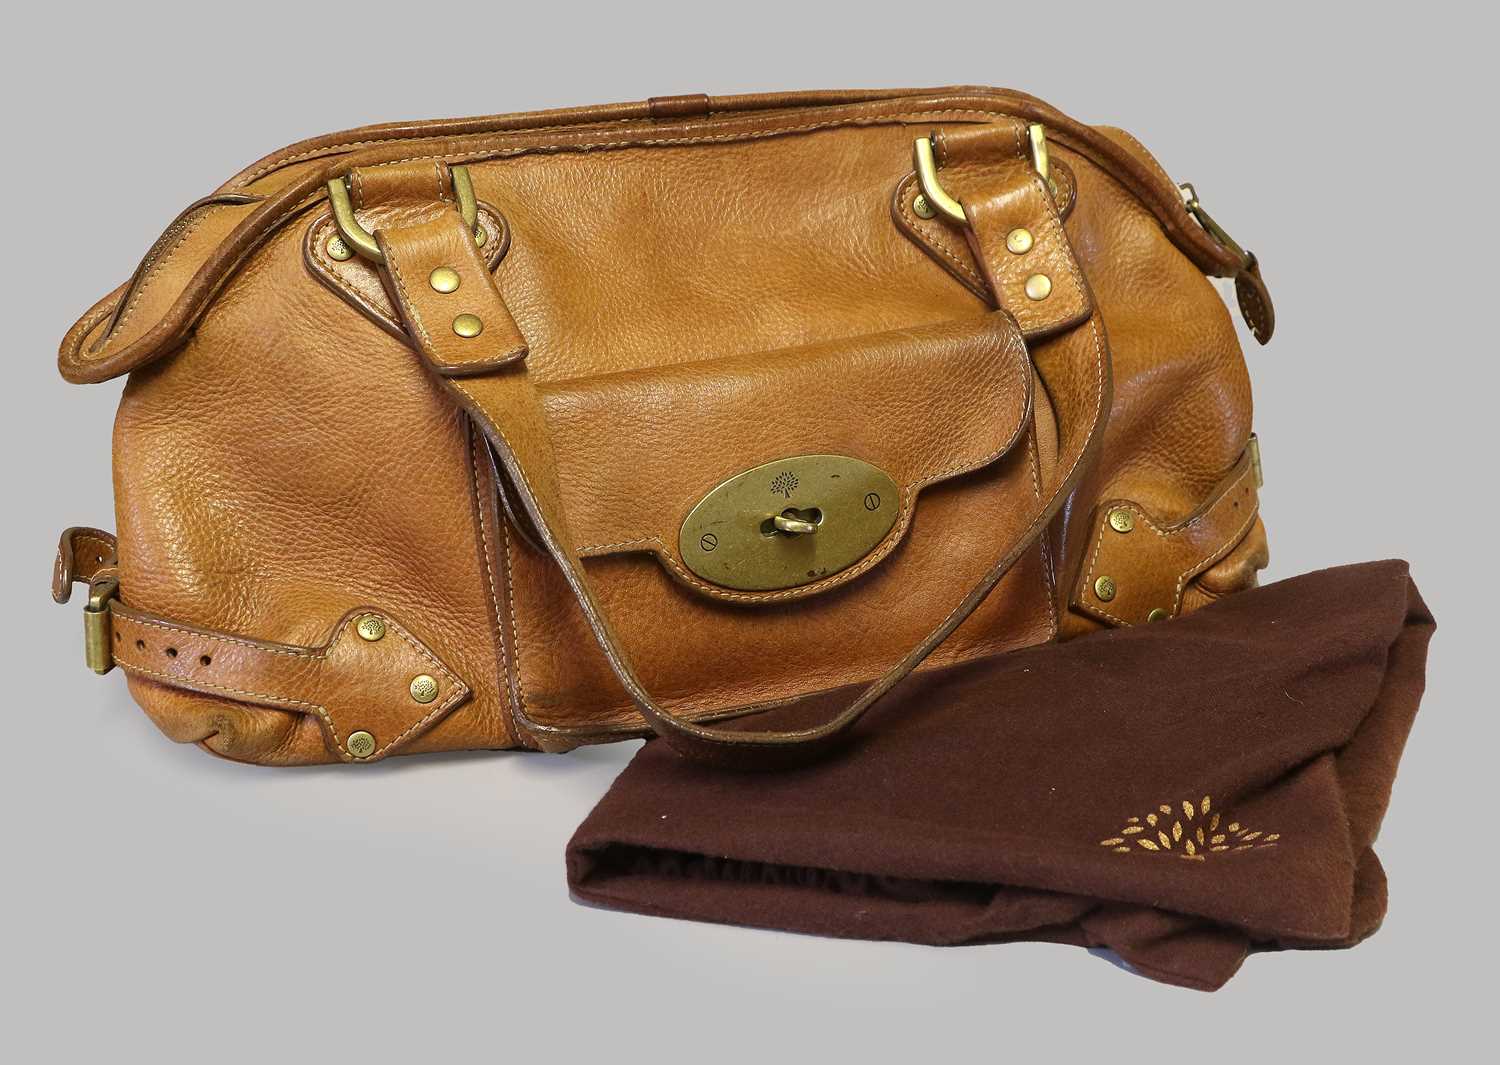 Mulberry Knightsbridge Oak Darwin Leather Shoulder Bag, with postman's lock and brass fittings,